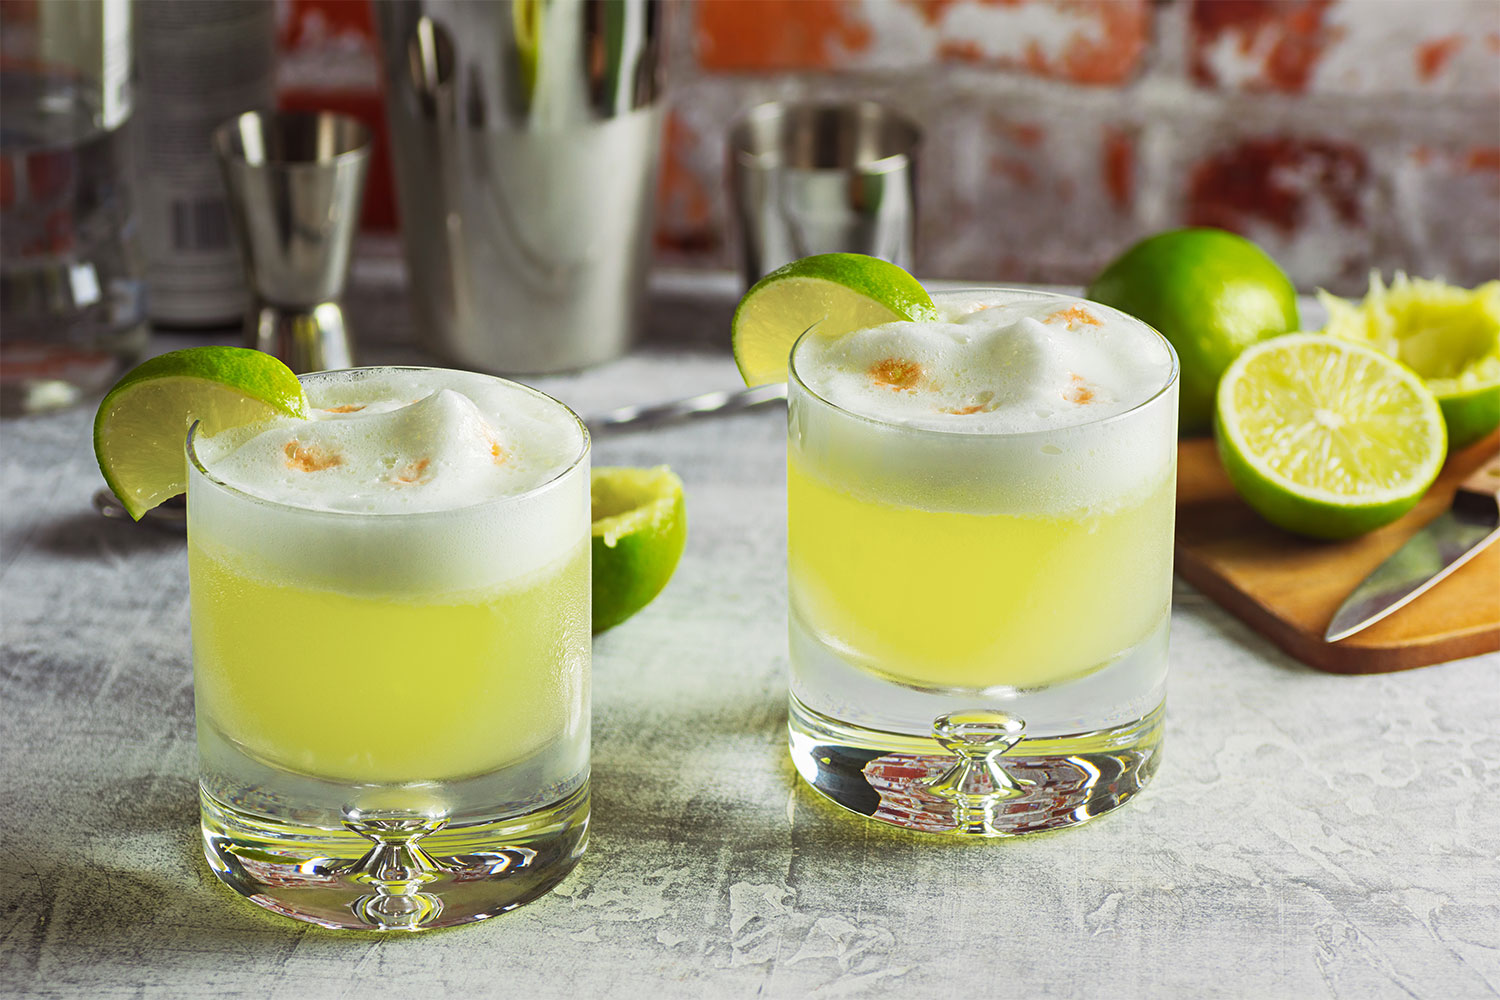 Pisco Is the South American Spirit You Should Be Using